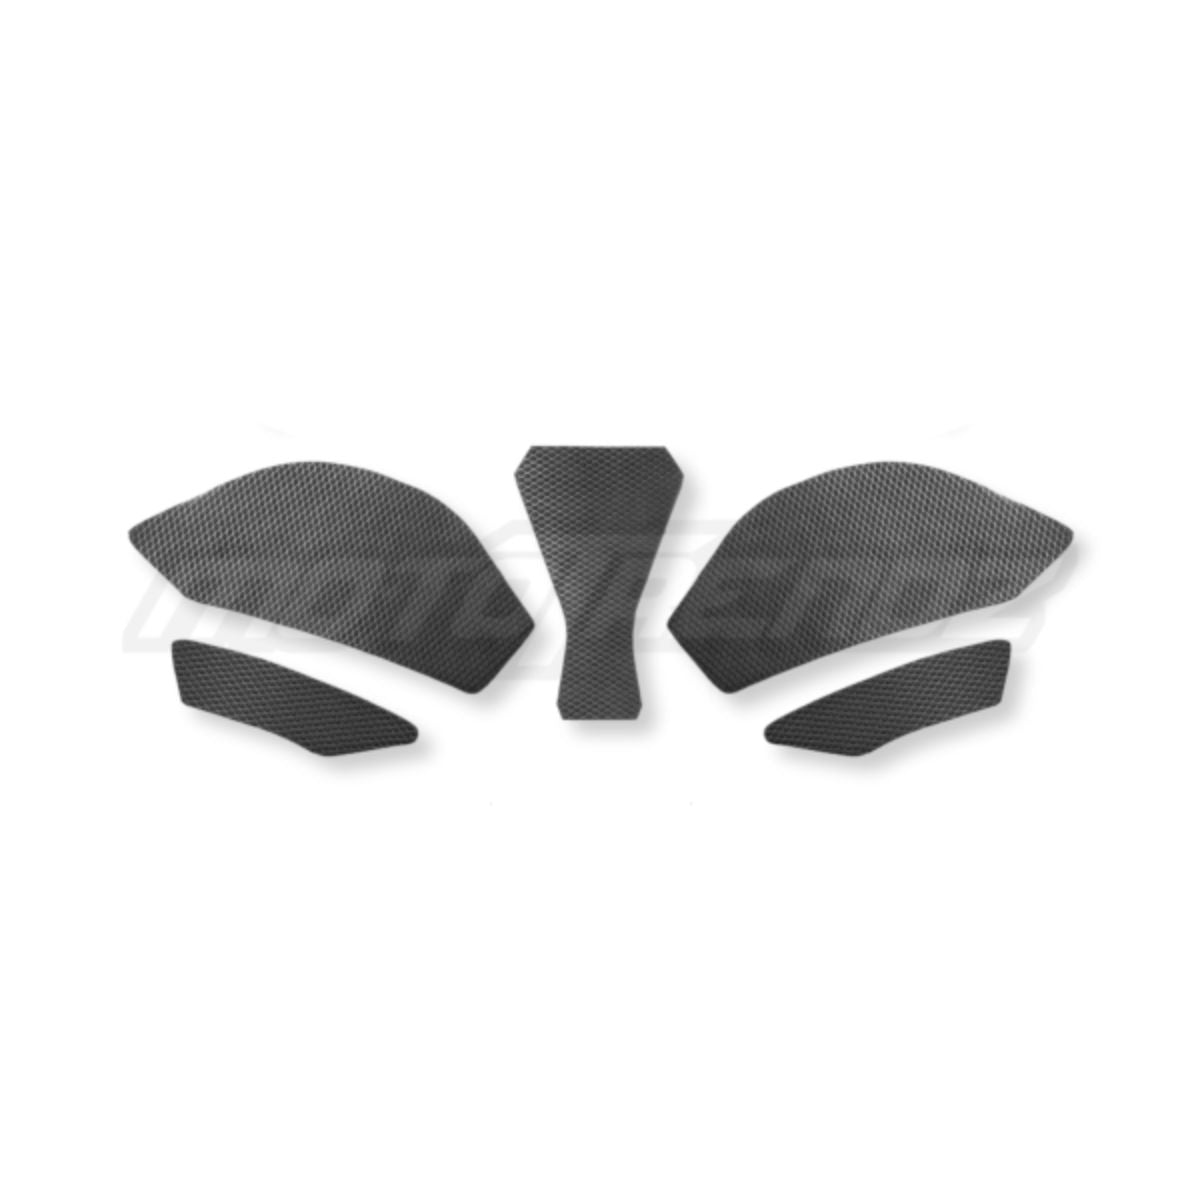 Traction Pads for Kawasaki ZX 6 R 2